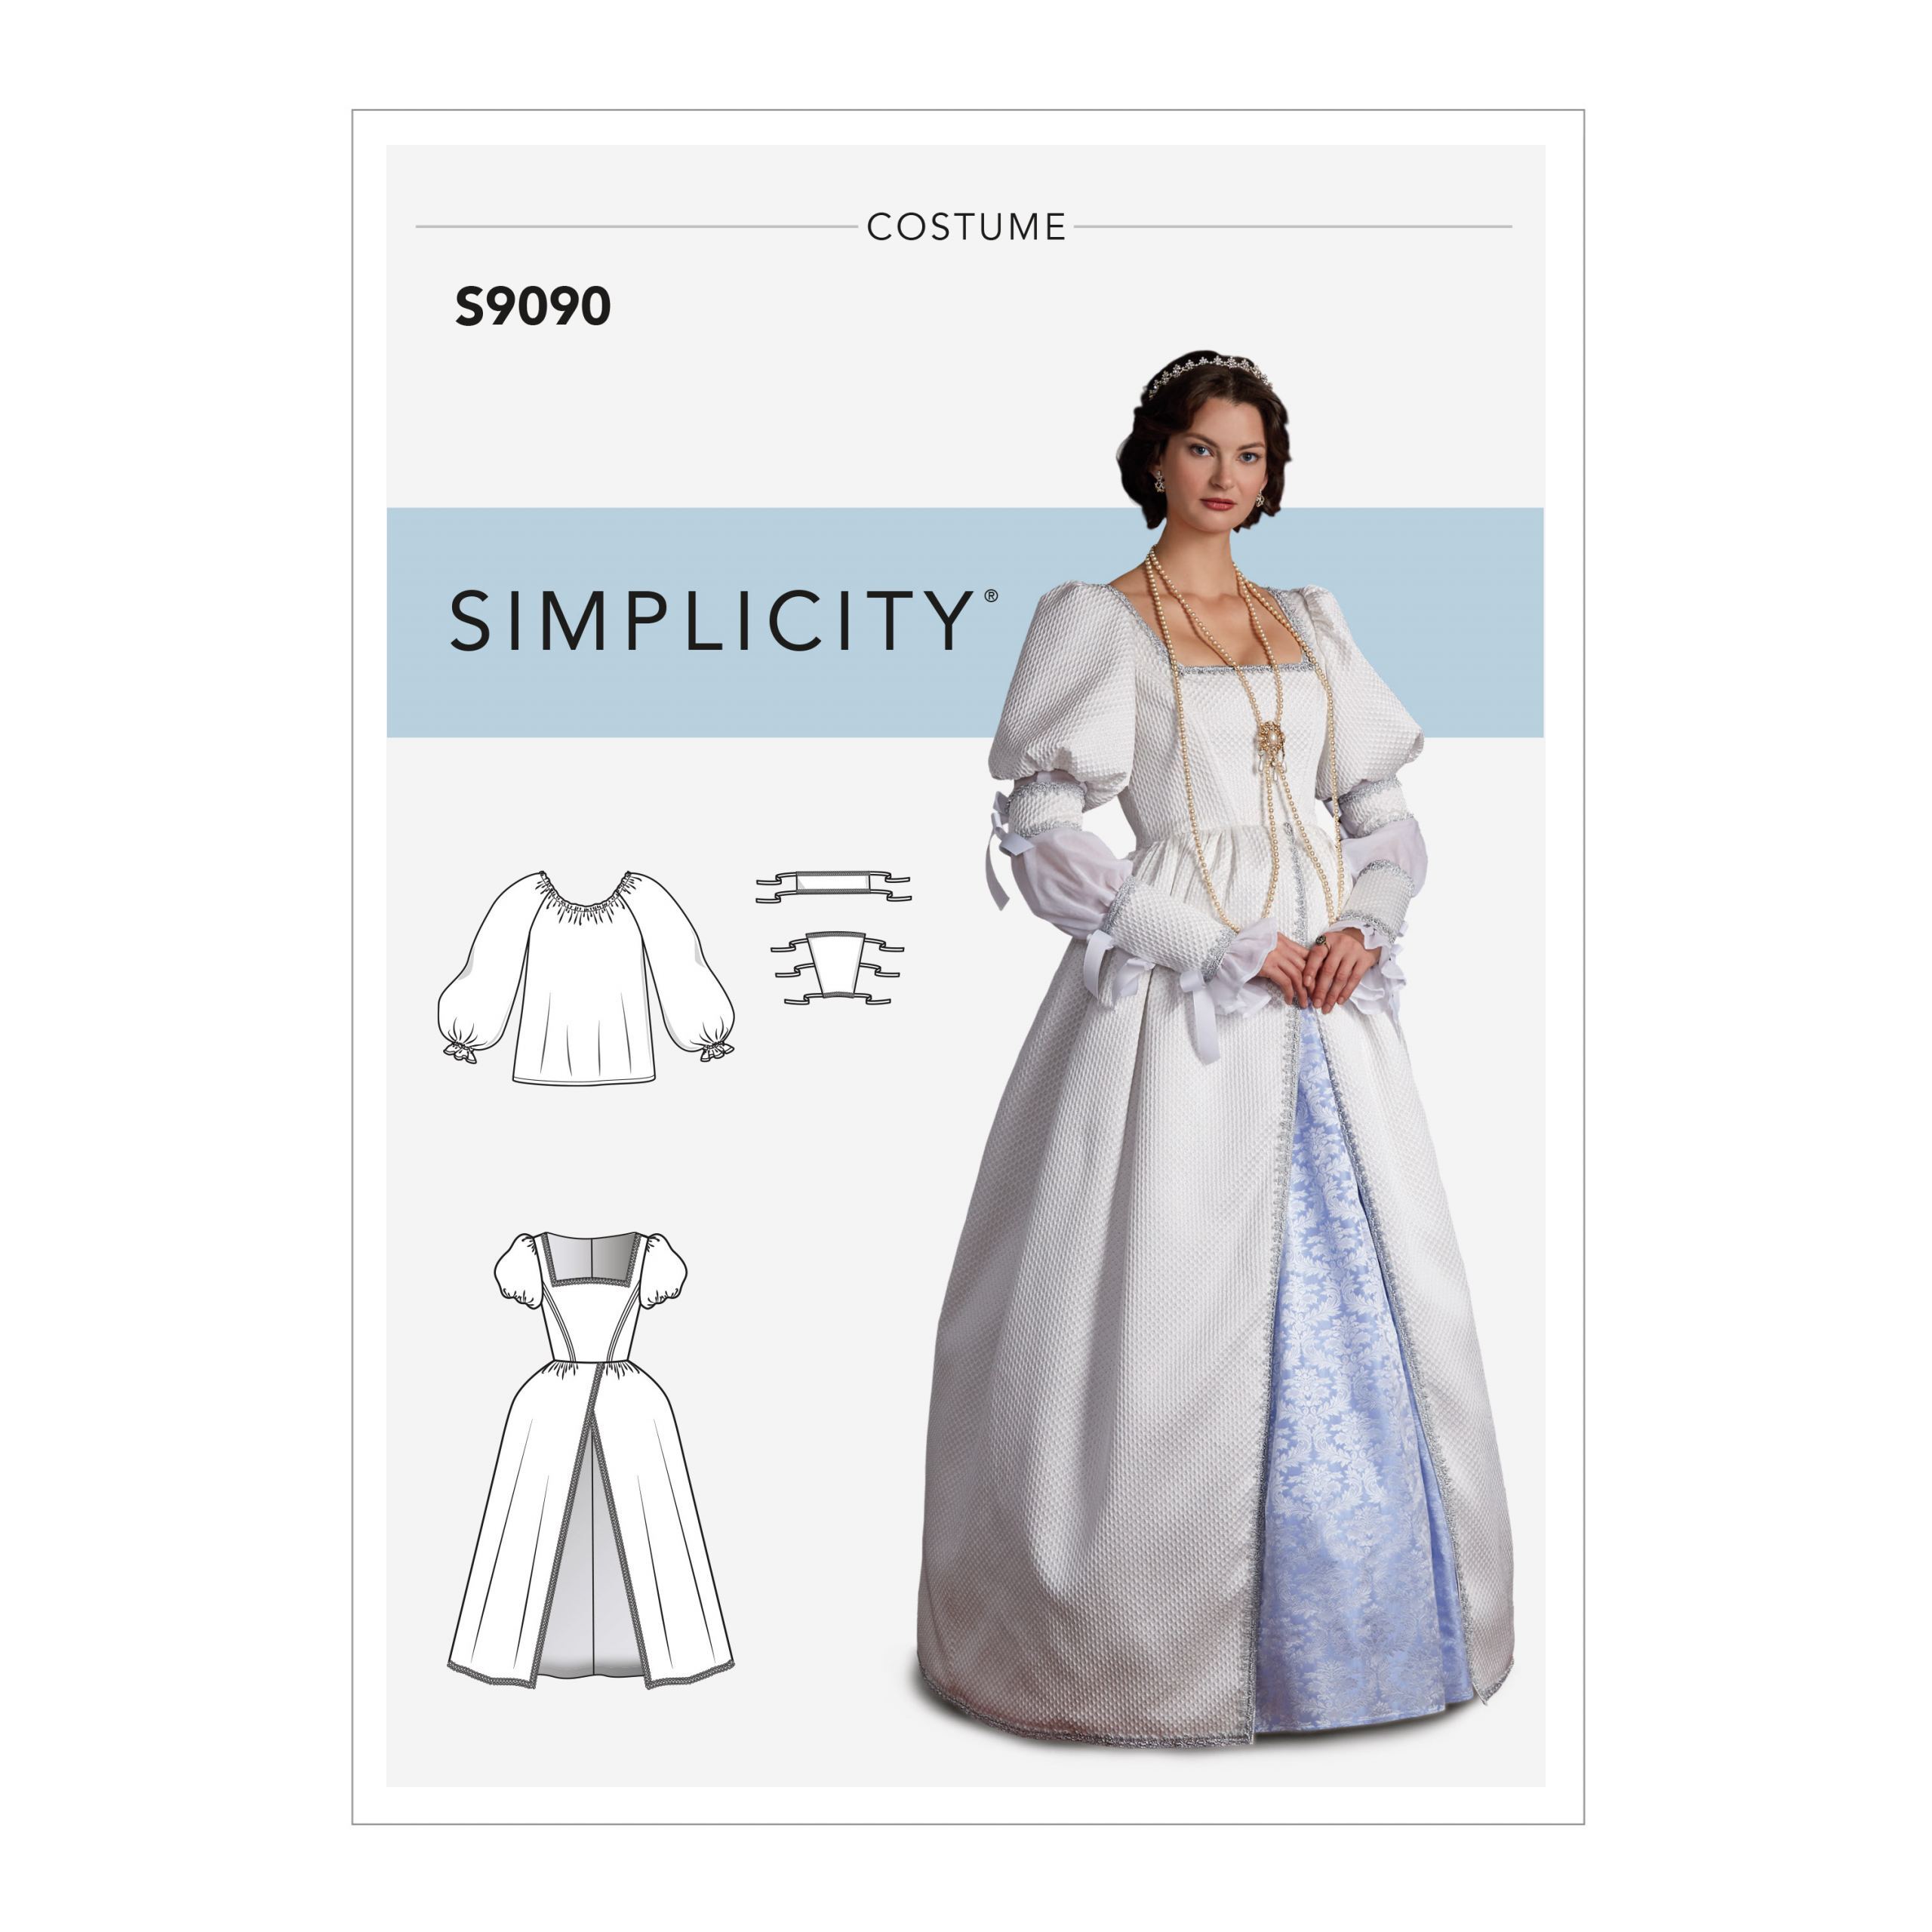 Simplicity Sewing Pattern S9090 Misses' Historical Costume R5